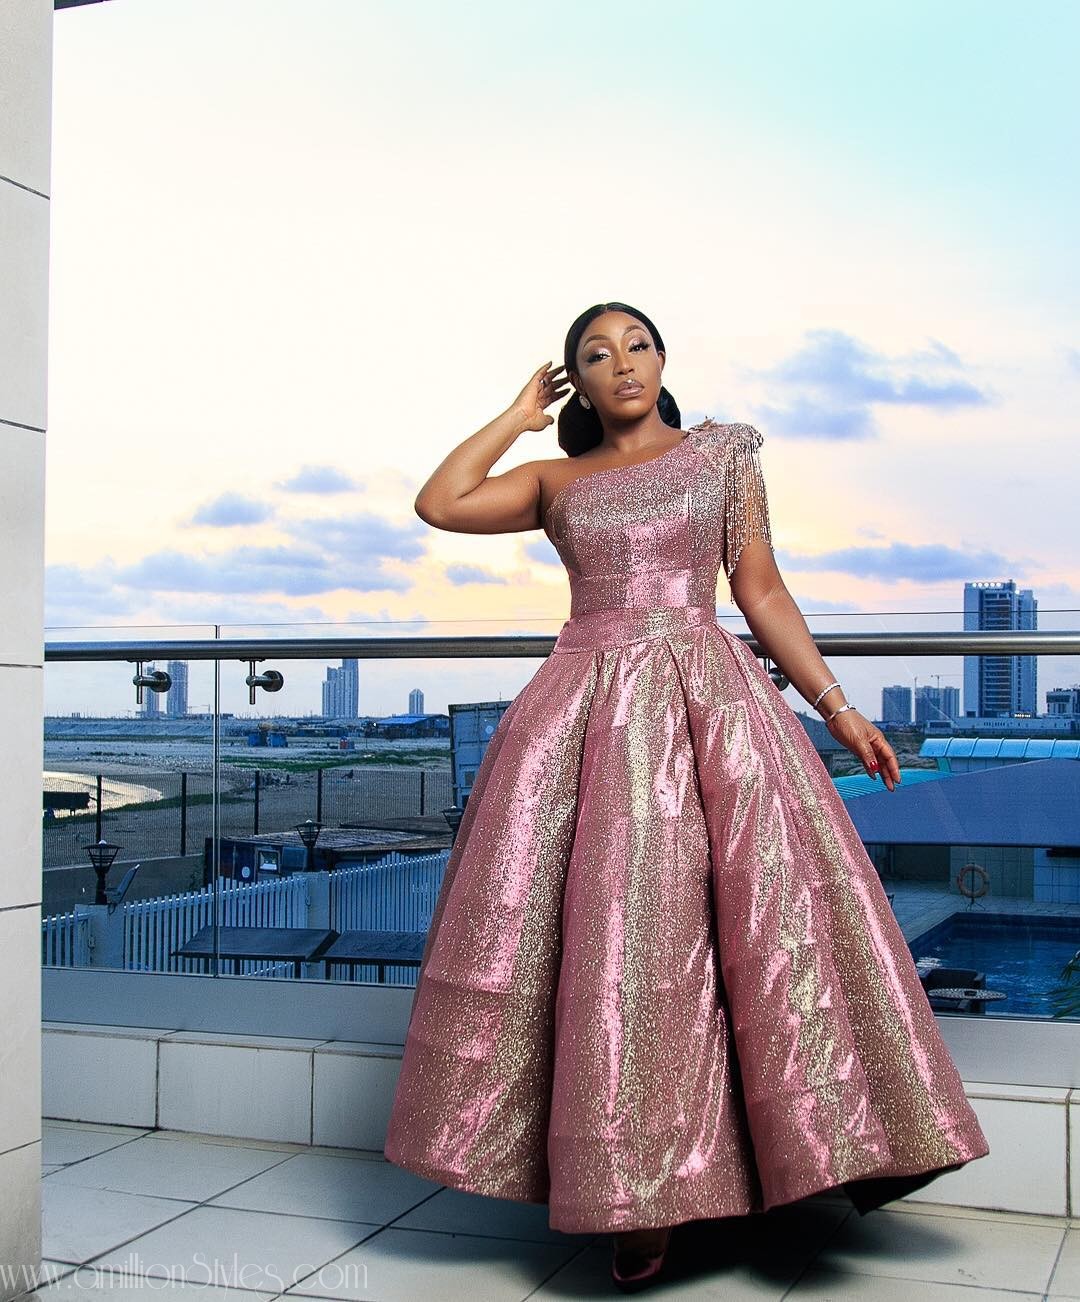 Rita Dominic Sparkles In A Ball Dress By Nigerian Label Tubo